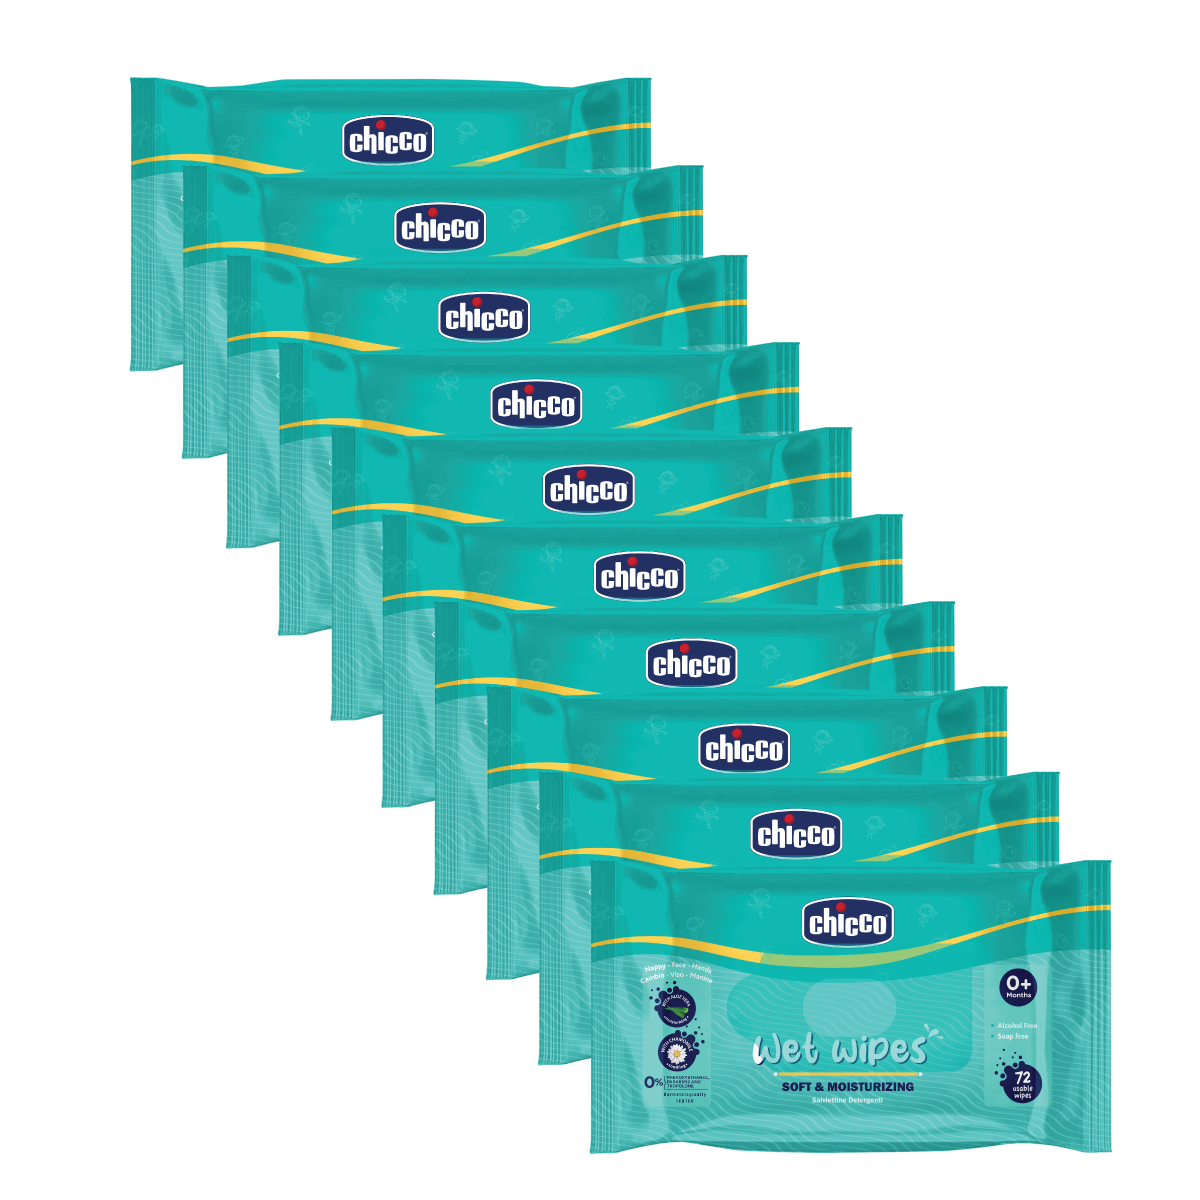 Chicco Wetwipes Pack of 5-720 PCS